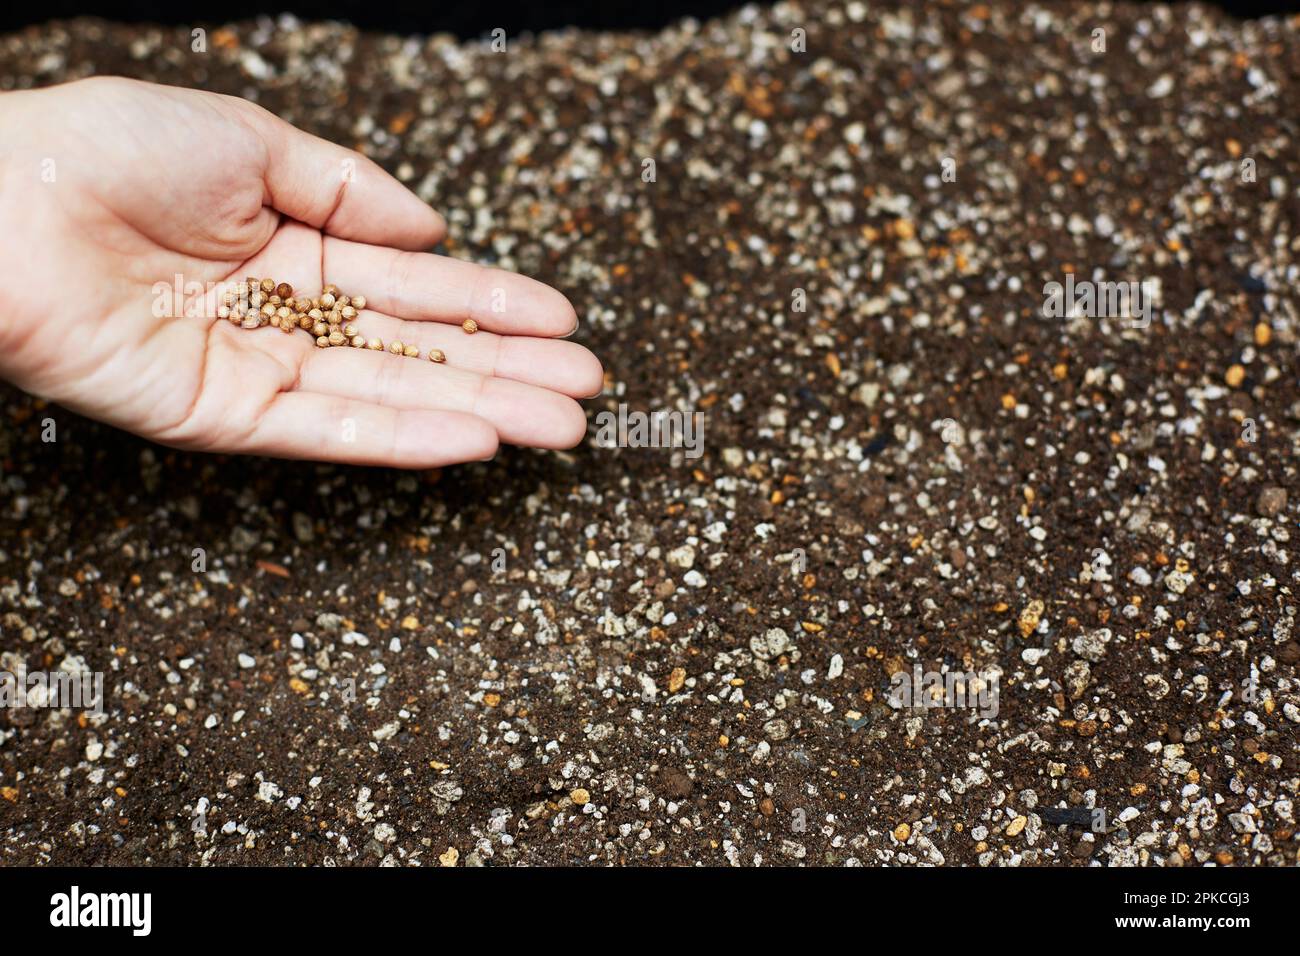 Hand of a woman sowing seeds into soil Stock Photo